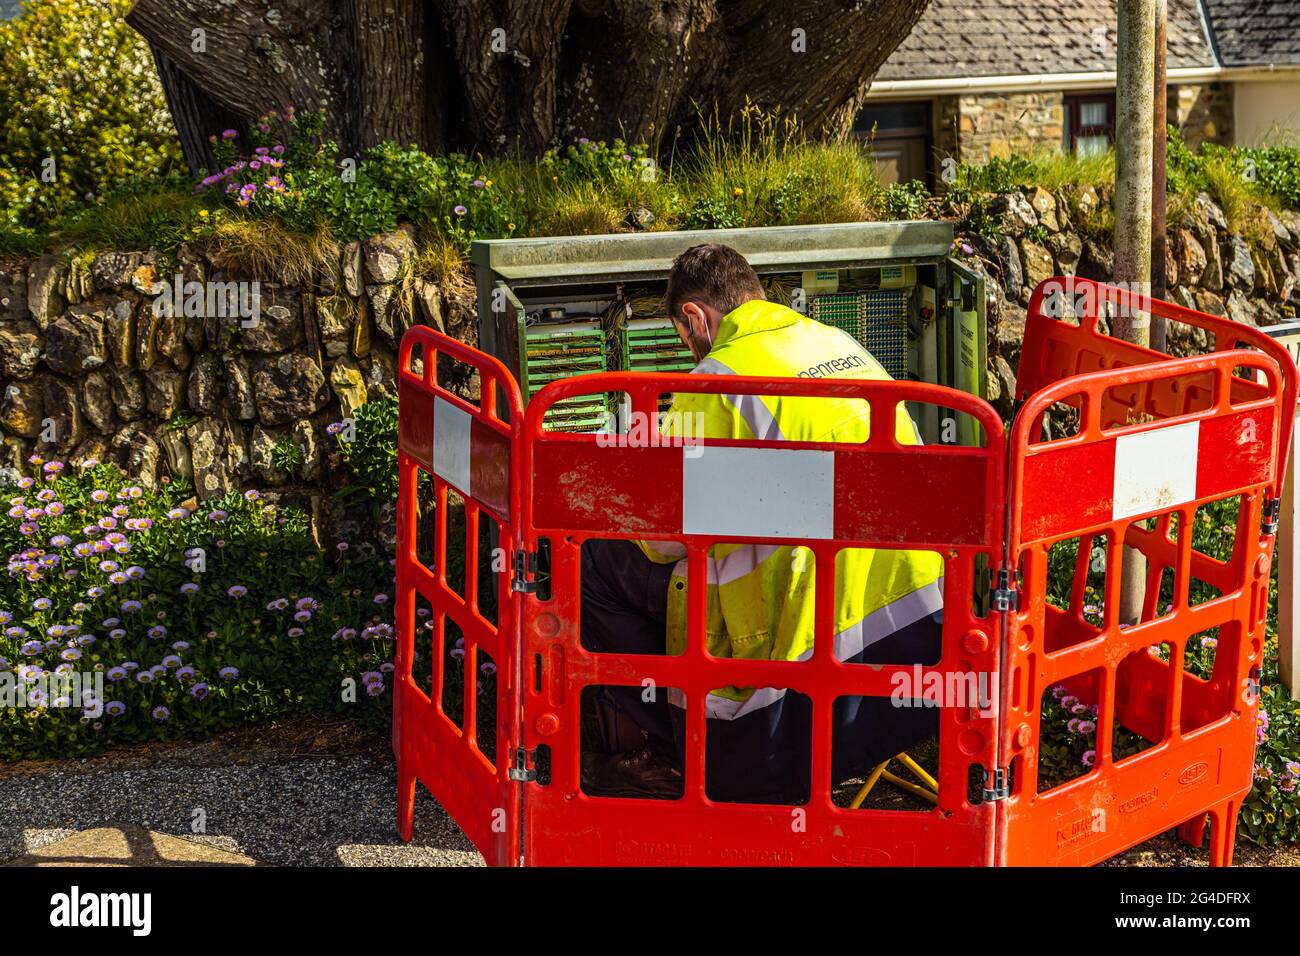 A telecoms engineer works on solving connection issues in a street cabinet, Cornwall England UK Stock Photo